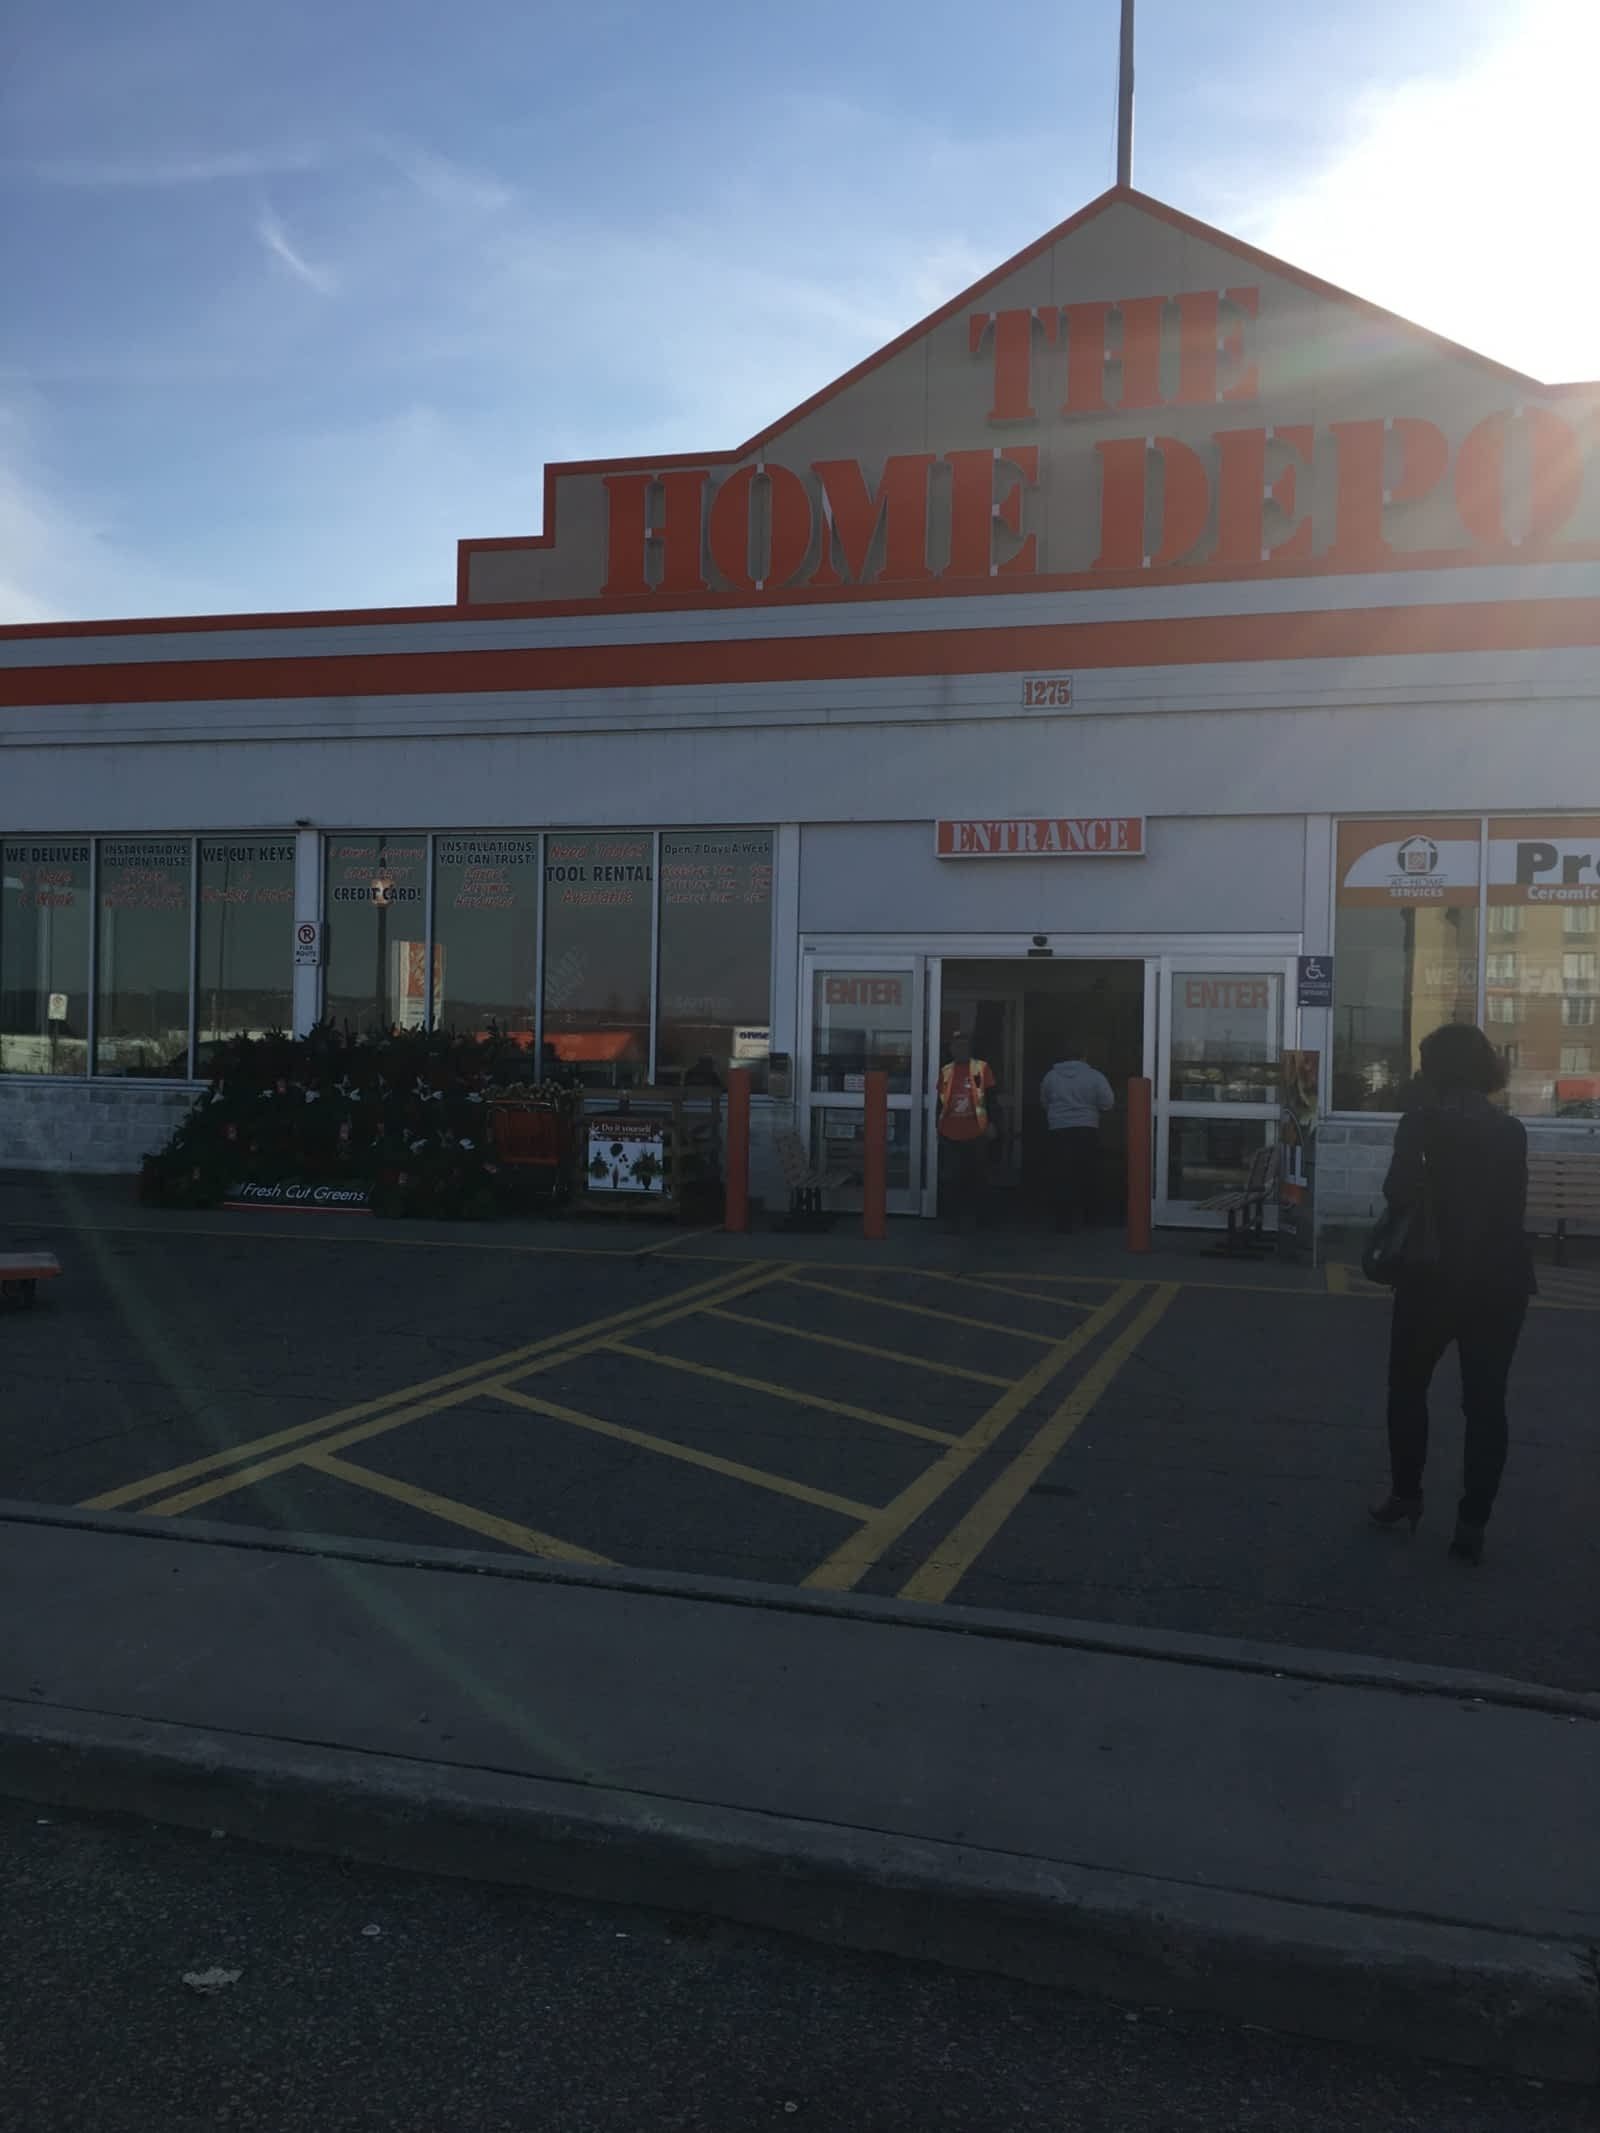 Home Depot Grand Opening « Oltmans Construction Co.